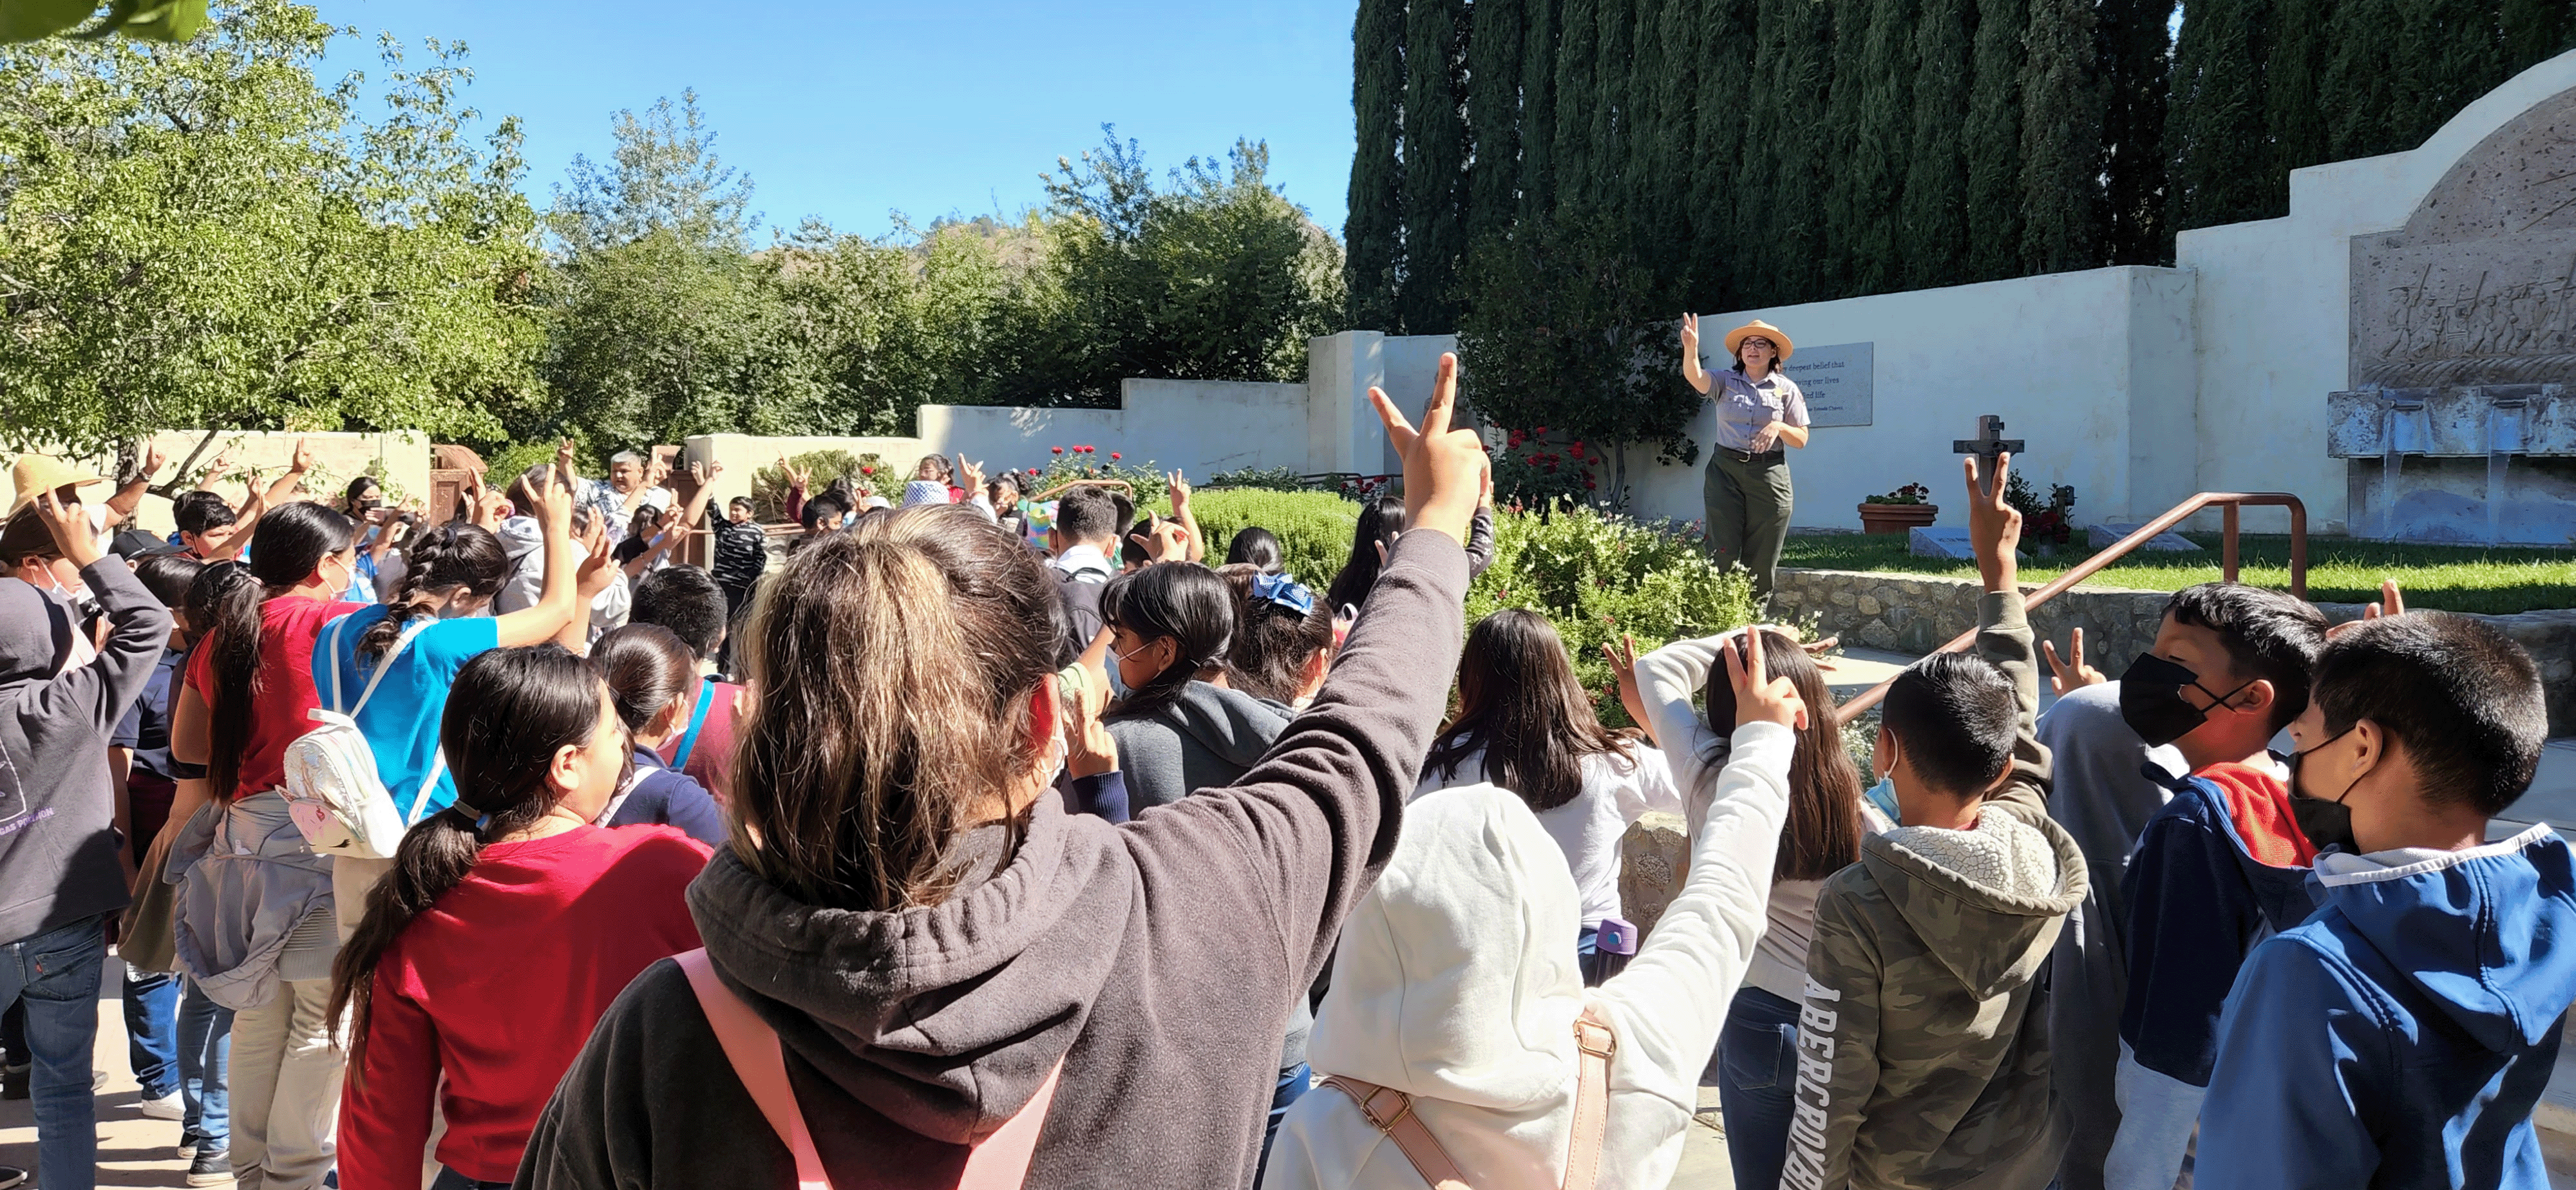 A park ranger stands in front of a group of school children in an outdoor garden holding two fingers in the air while the children do the same